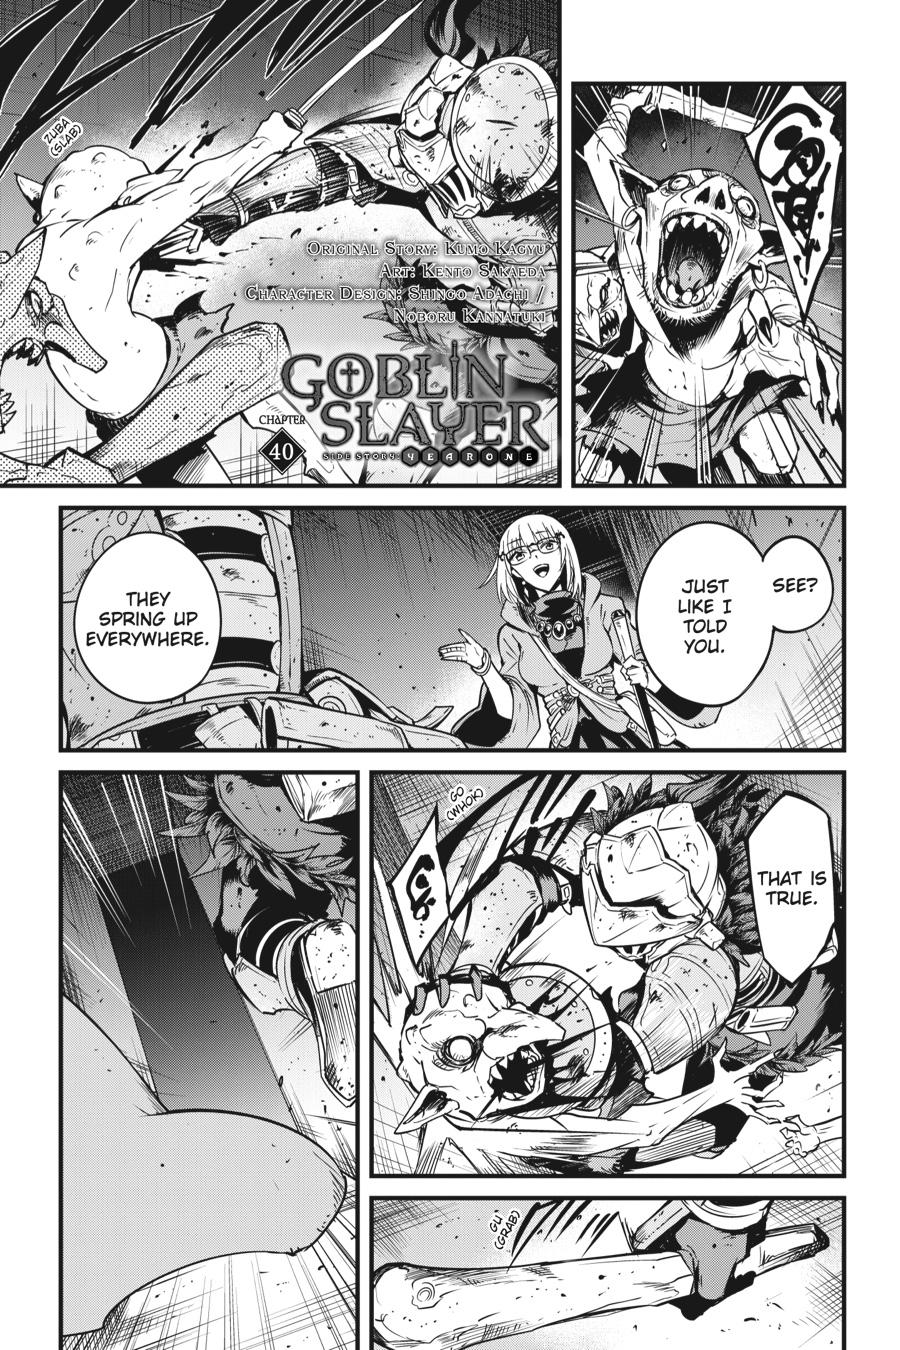 Goblin Slayer: Side Story Year One - Page 2